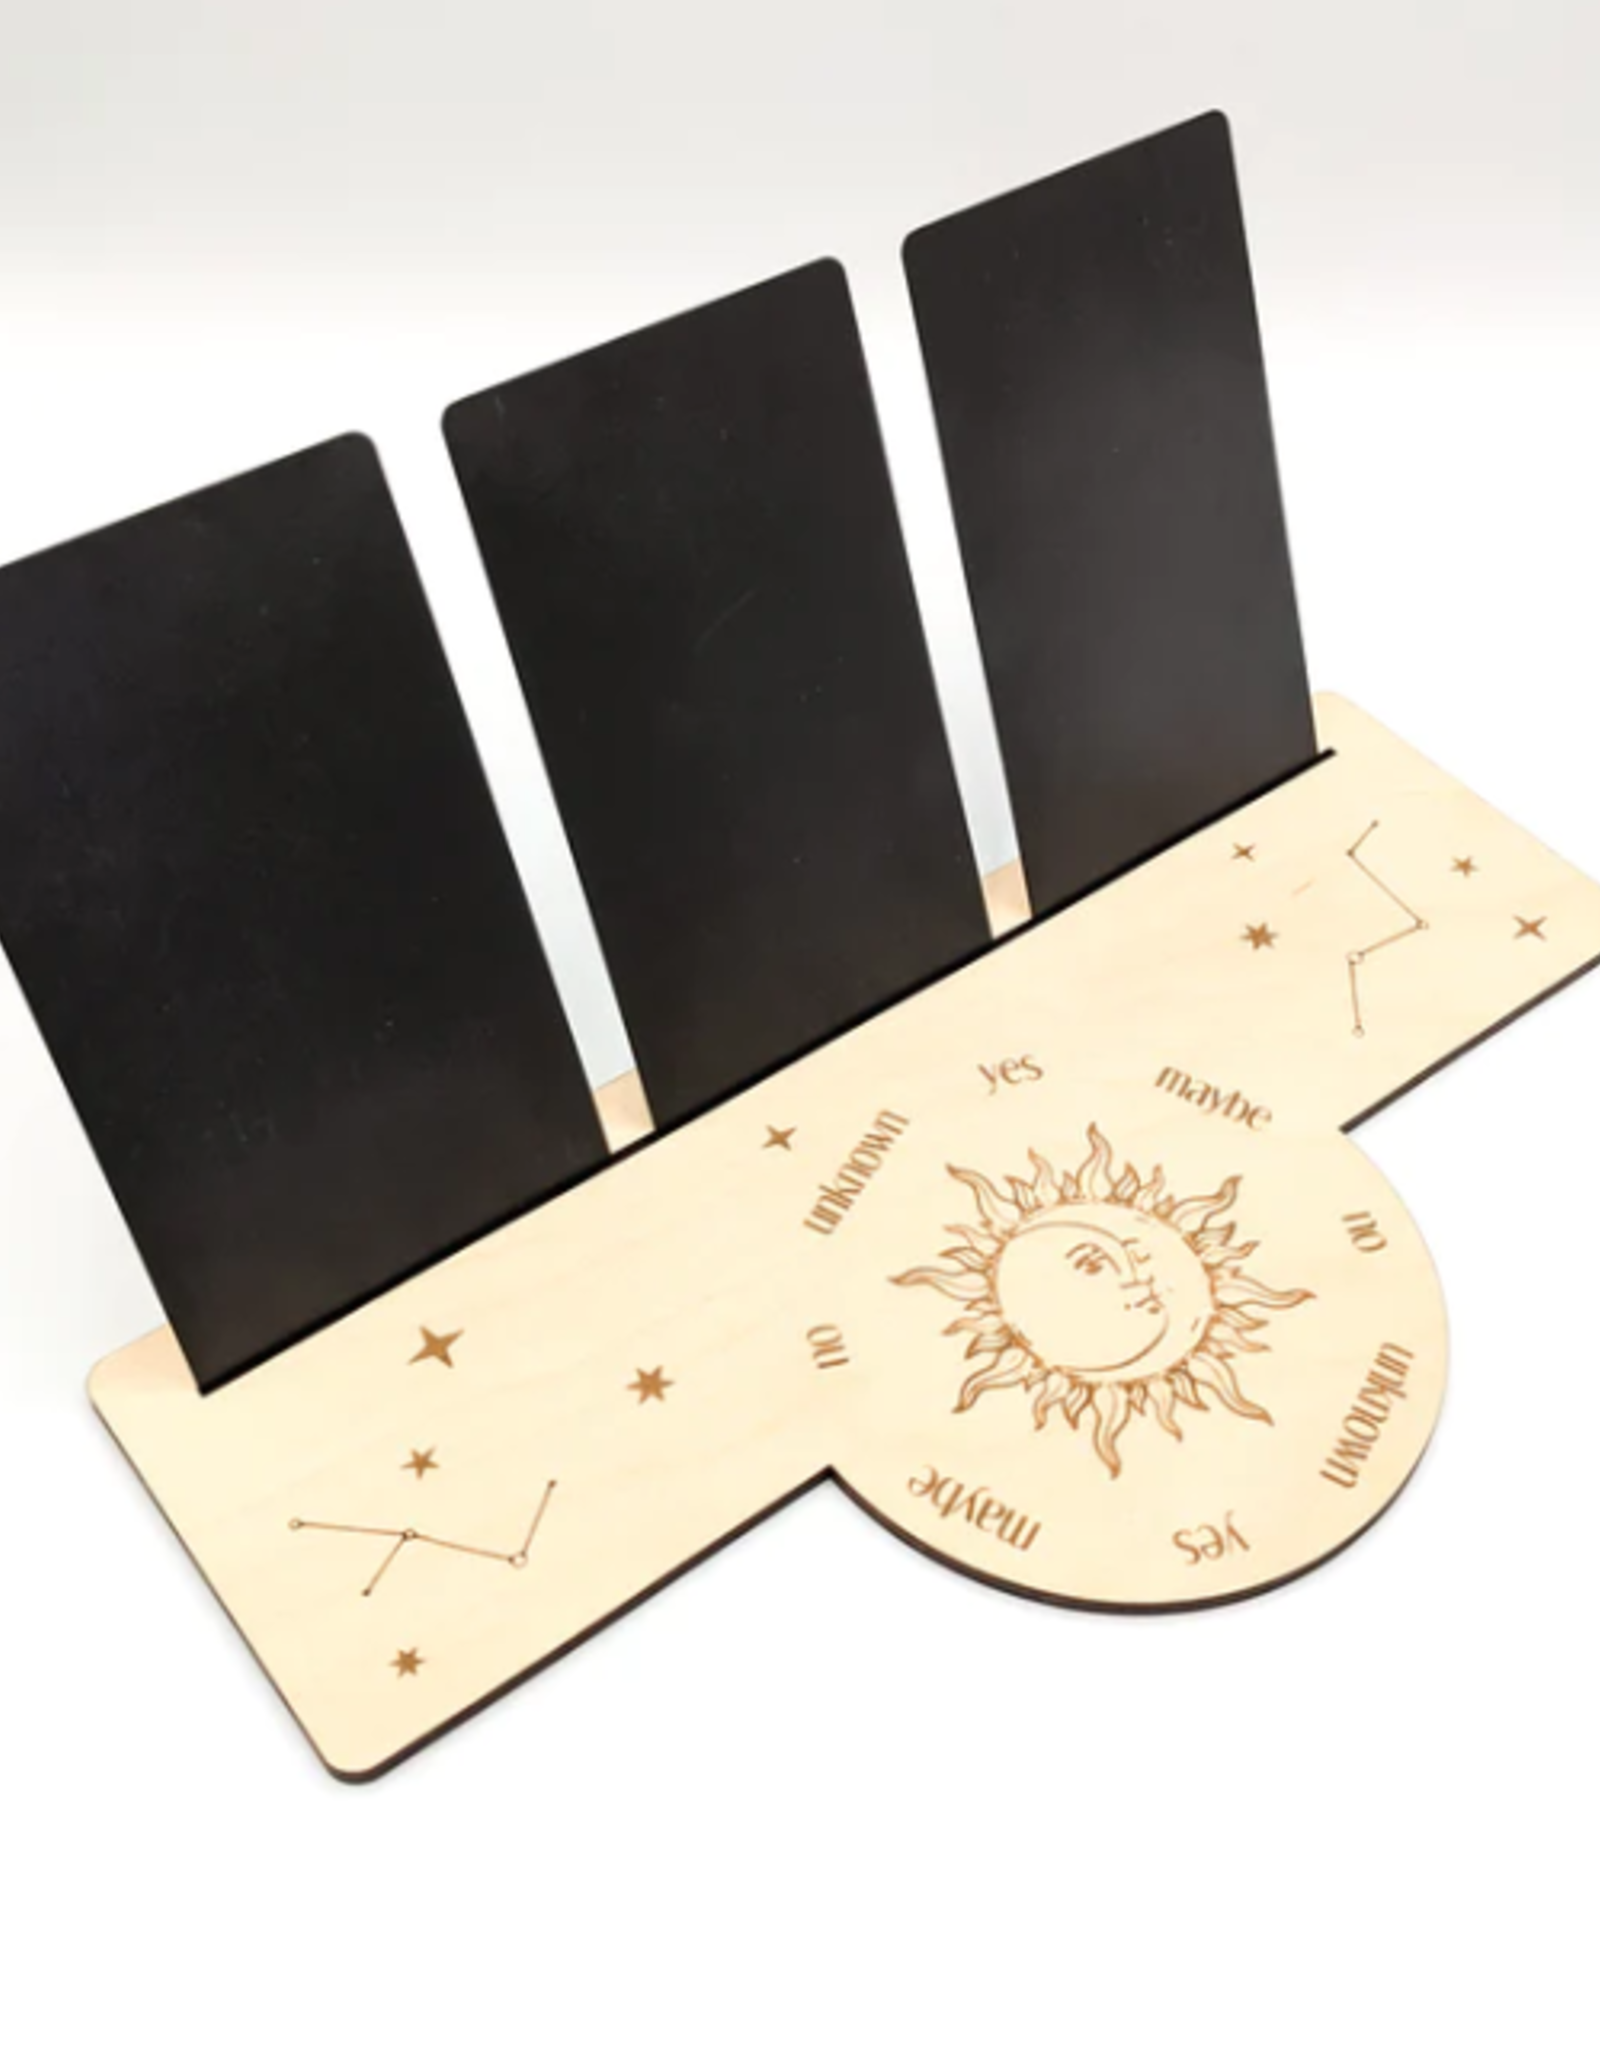 Ritual Pursuits Pendulum Board Tarot Card Stand with Constellations